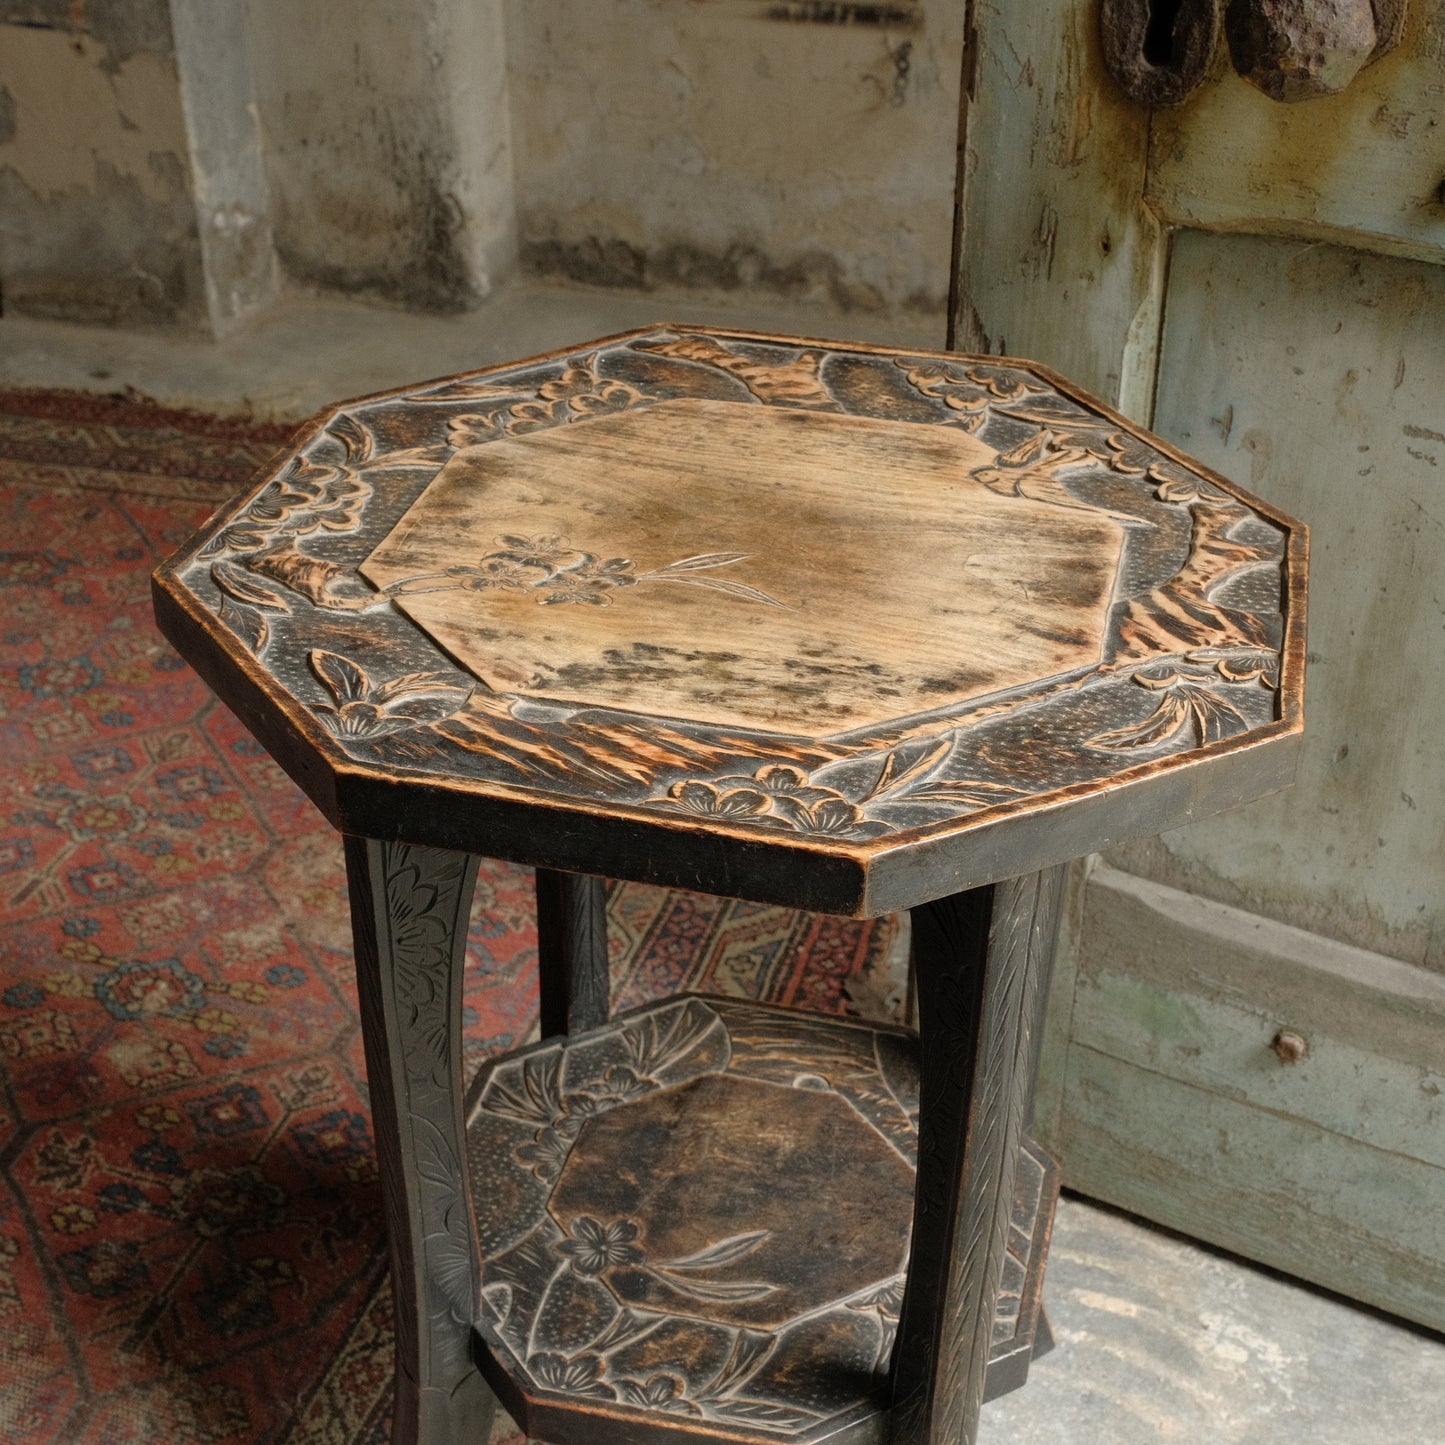 Octagonal Liberty Table with Birds